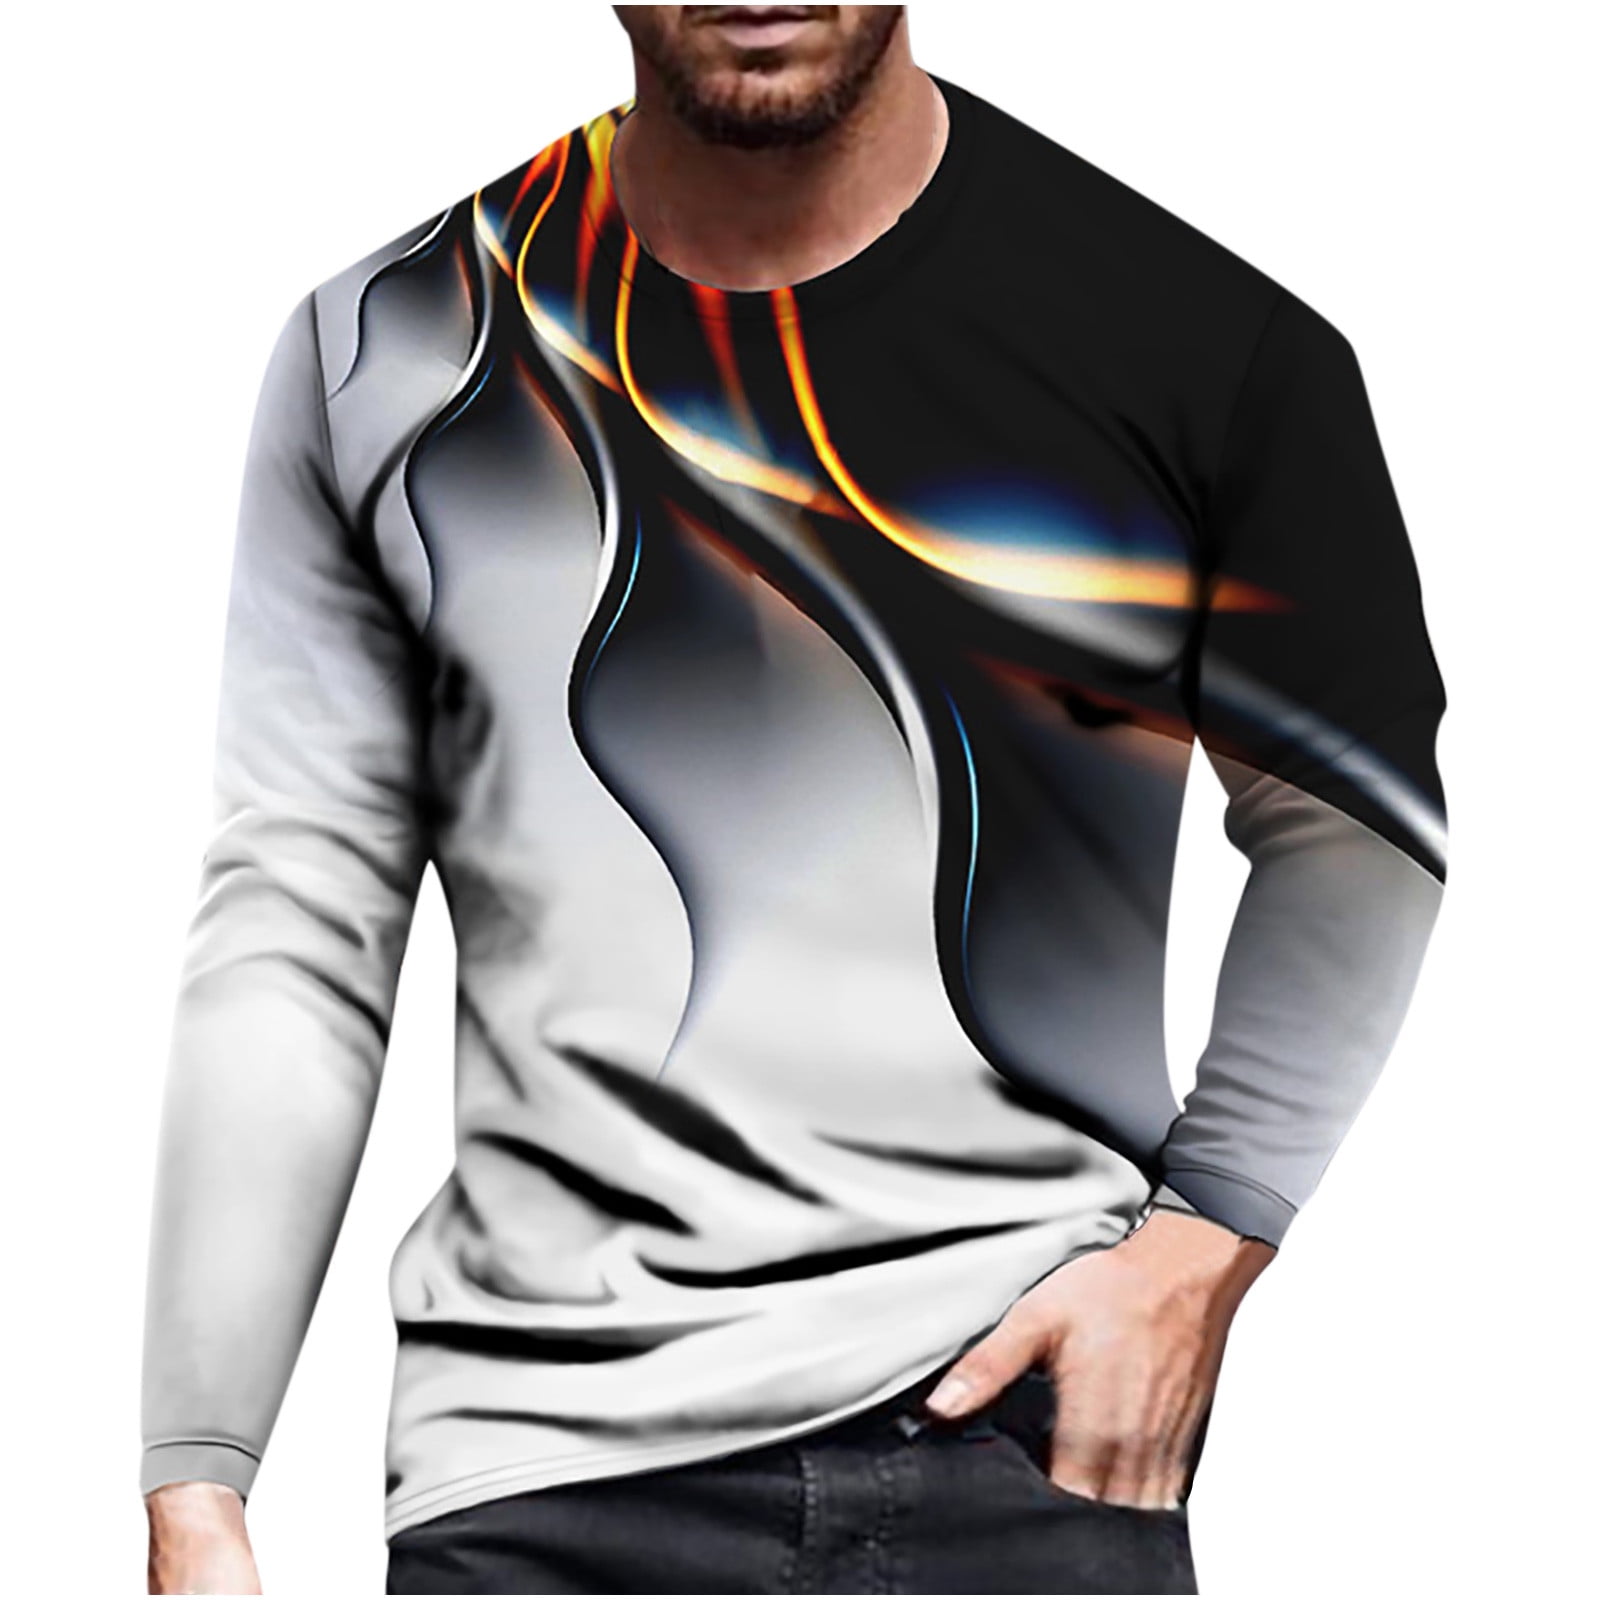 Oversized T Shirts for Men Men Trendy Casual Pullover Printed Short Sleeve T Shirt Blouse Shirts for Men Shirts for Men Pack V Neck T Shirts Clearance on